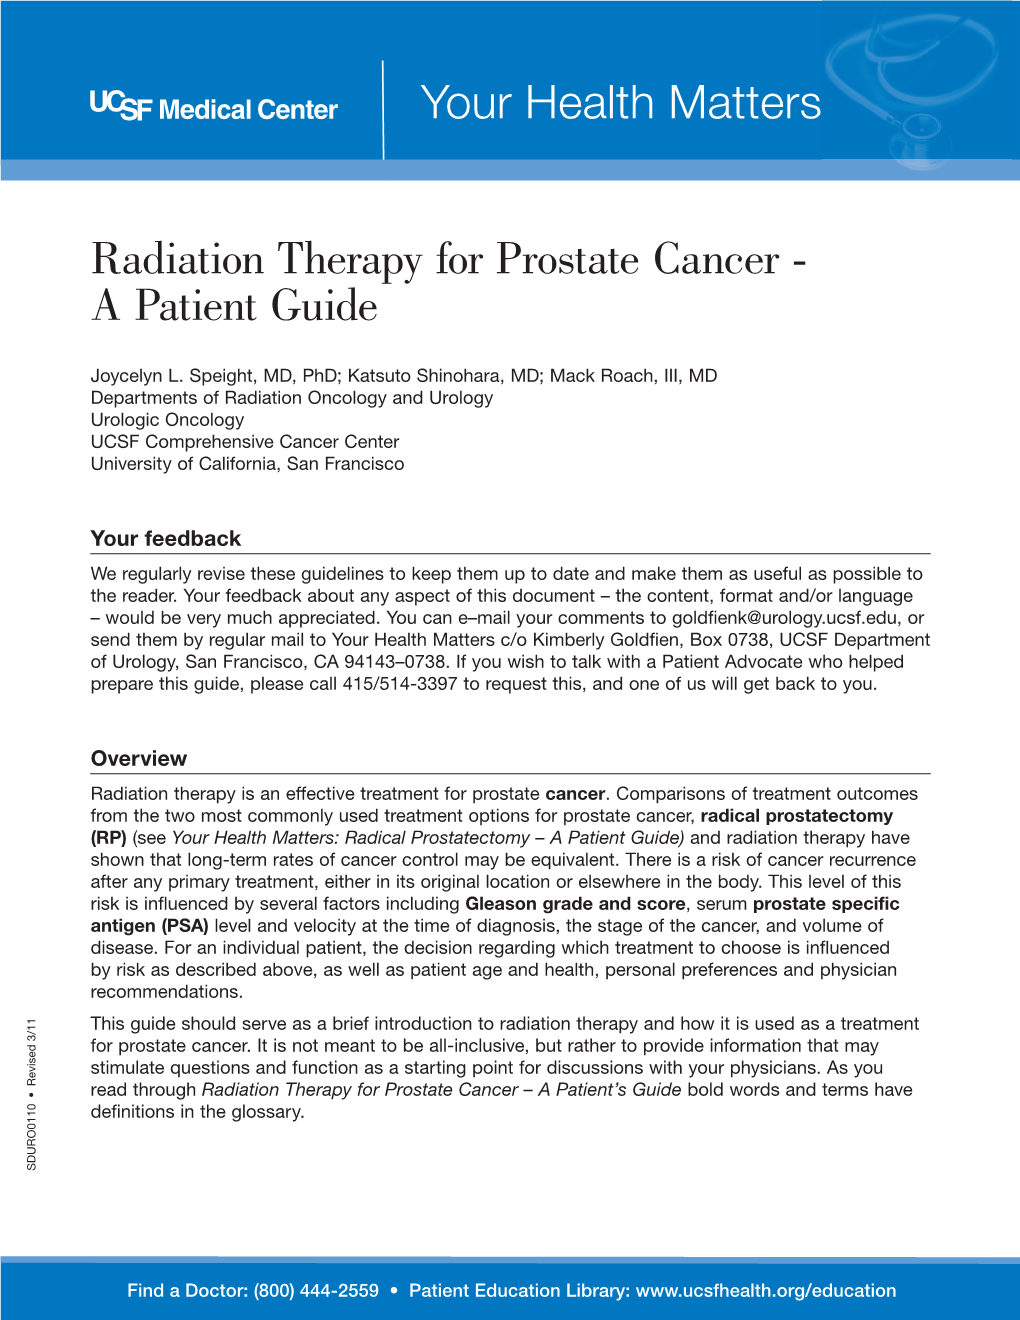 Radiation Therapy for Prostate Cancer - a Patient Guide